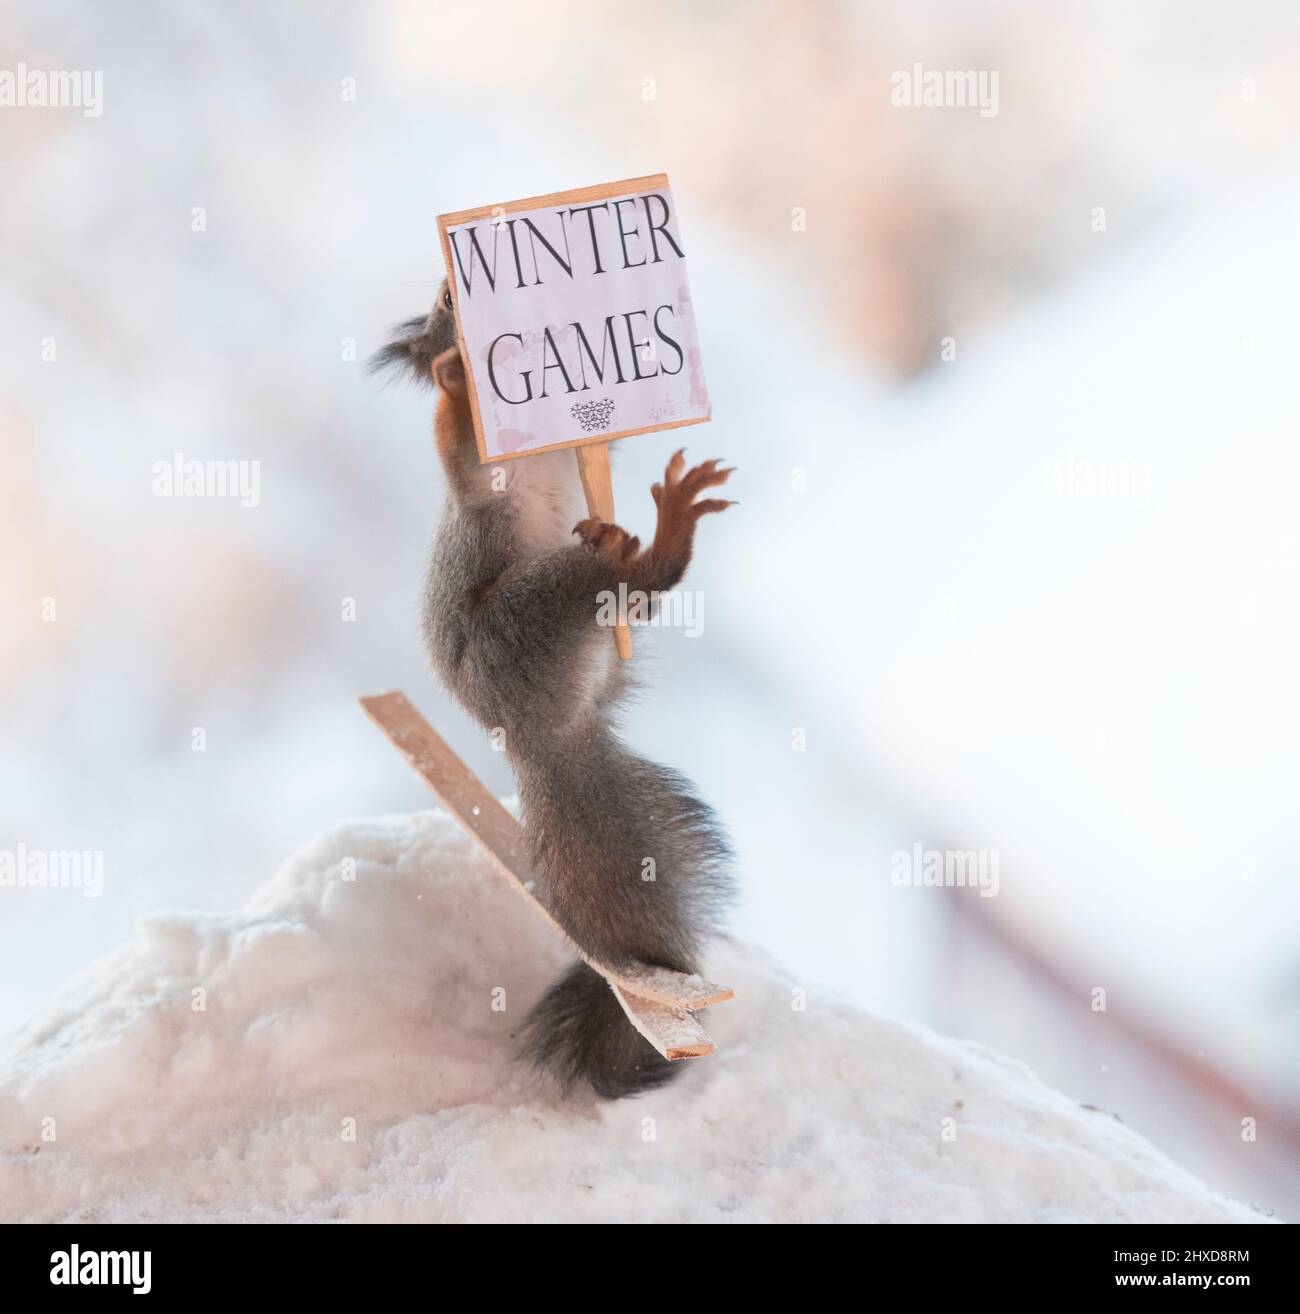 Squirrel on skis with a sign 'Winter Games'. Stock Photo